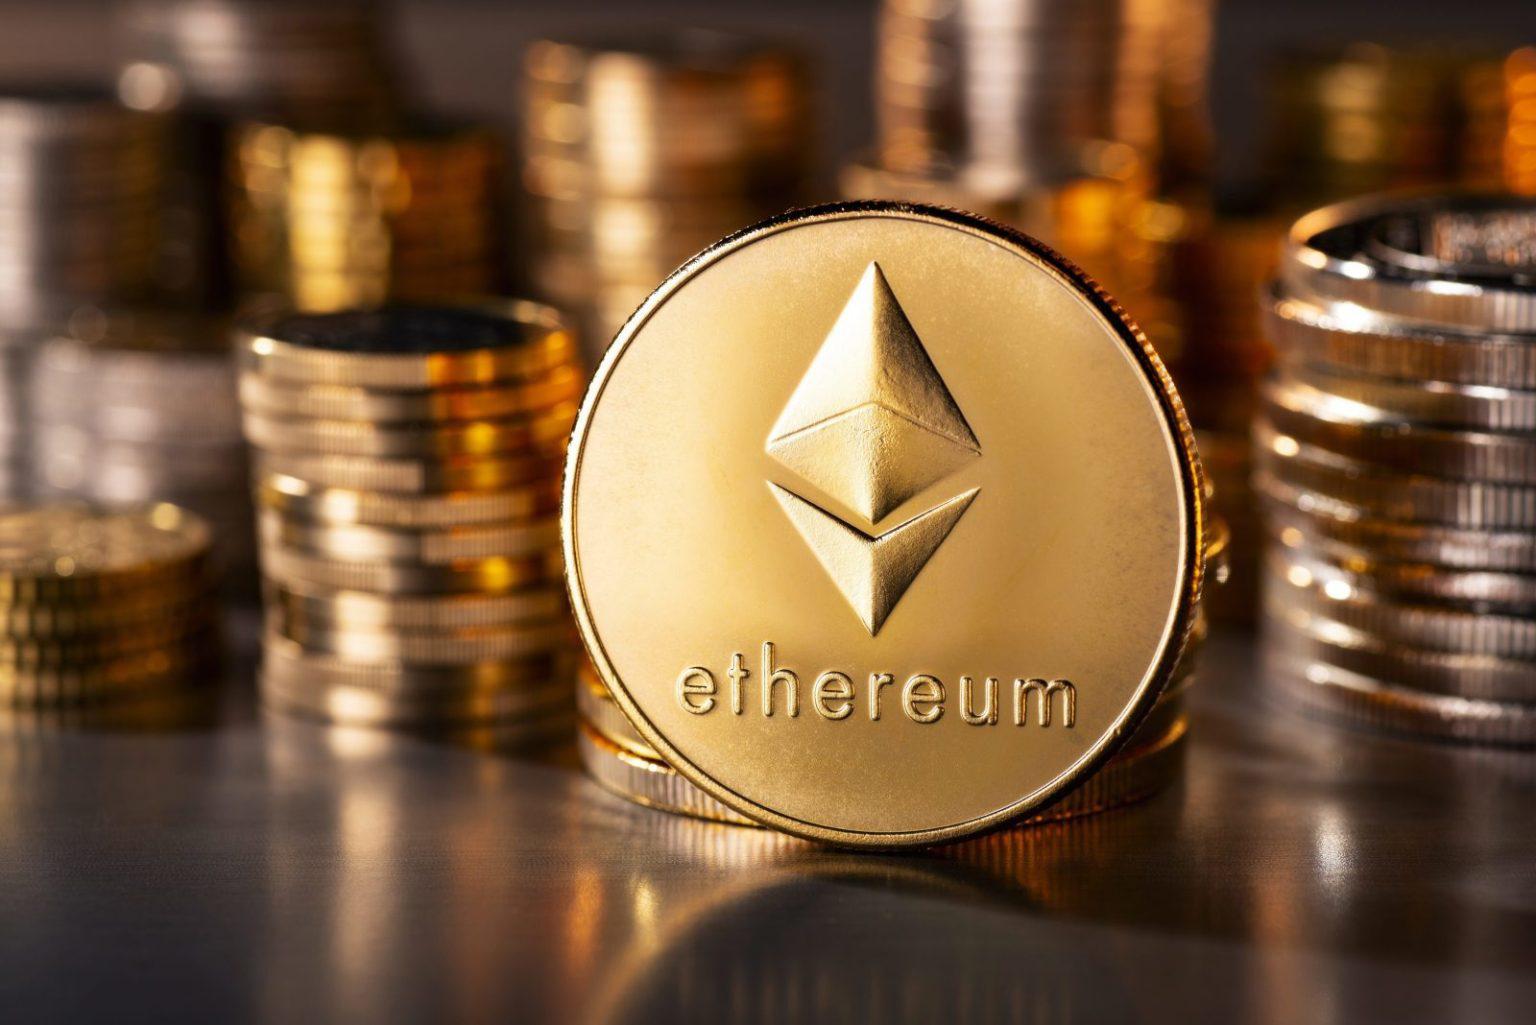 Ethereum Crosses $1150 after 30% Jump, Bitcoin Consolidates